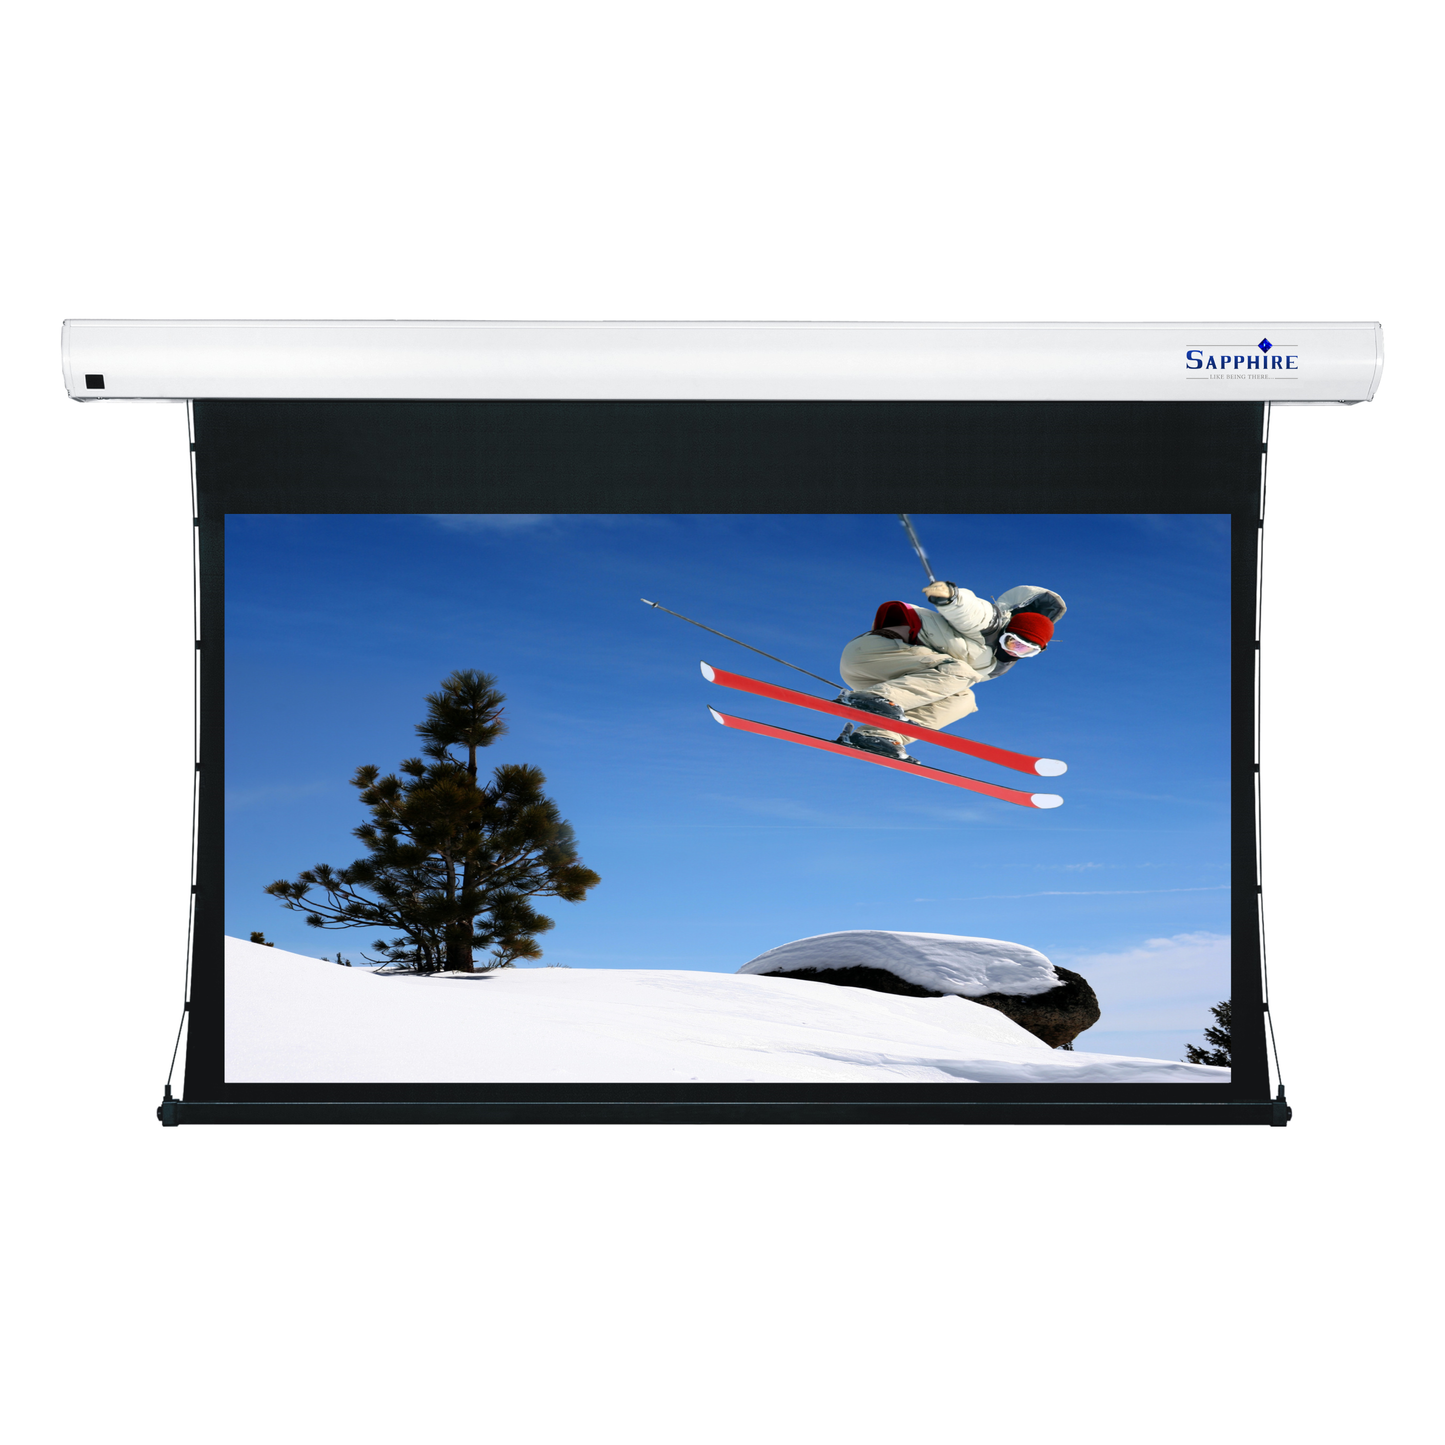 Sapphire Tab Tension Infra Red 16:9 Format Electric Screen Viewing area 3985 x 2241mm Approx Case Dimensions L 4449 x H 145 x D 137mm